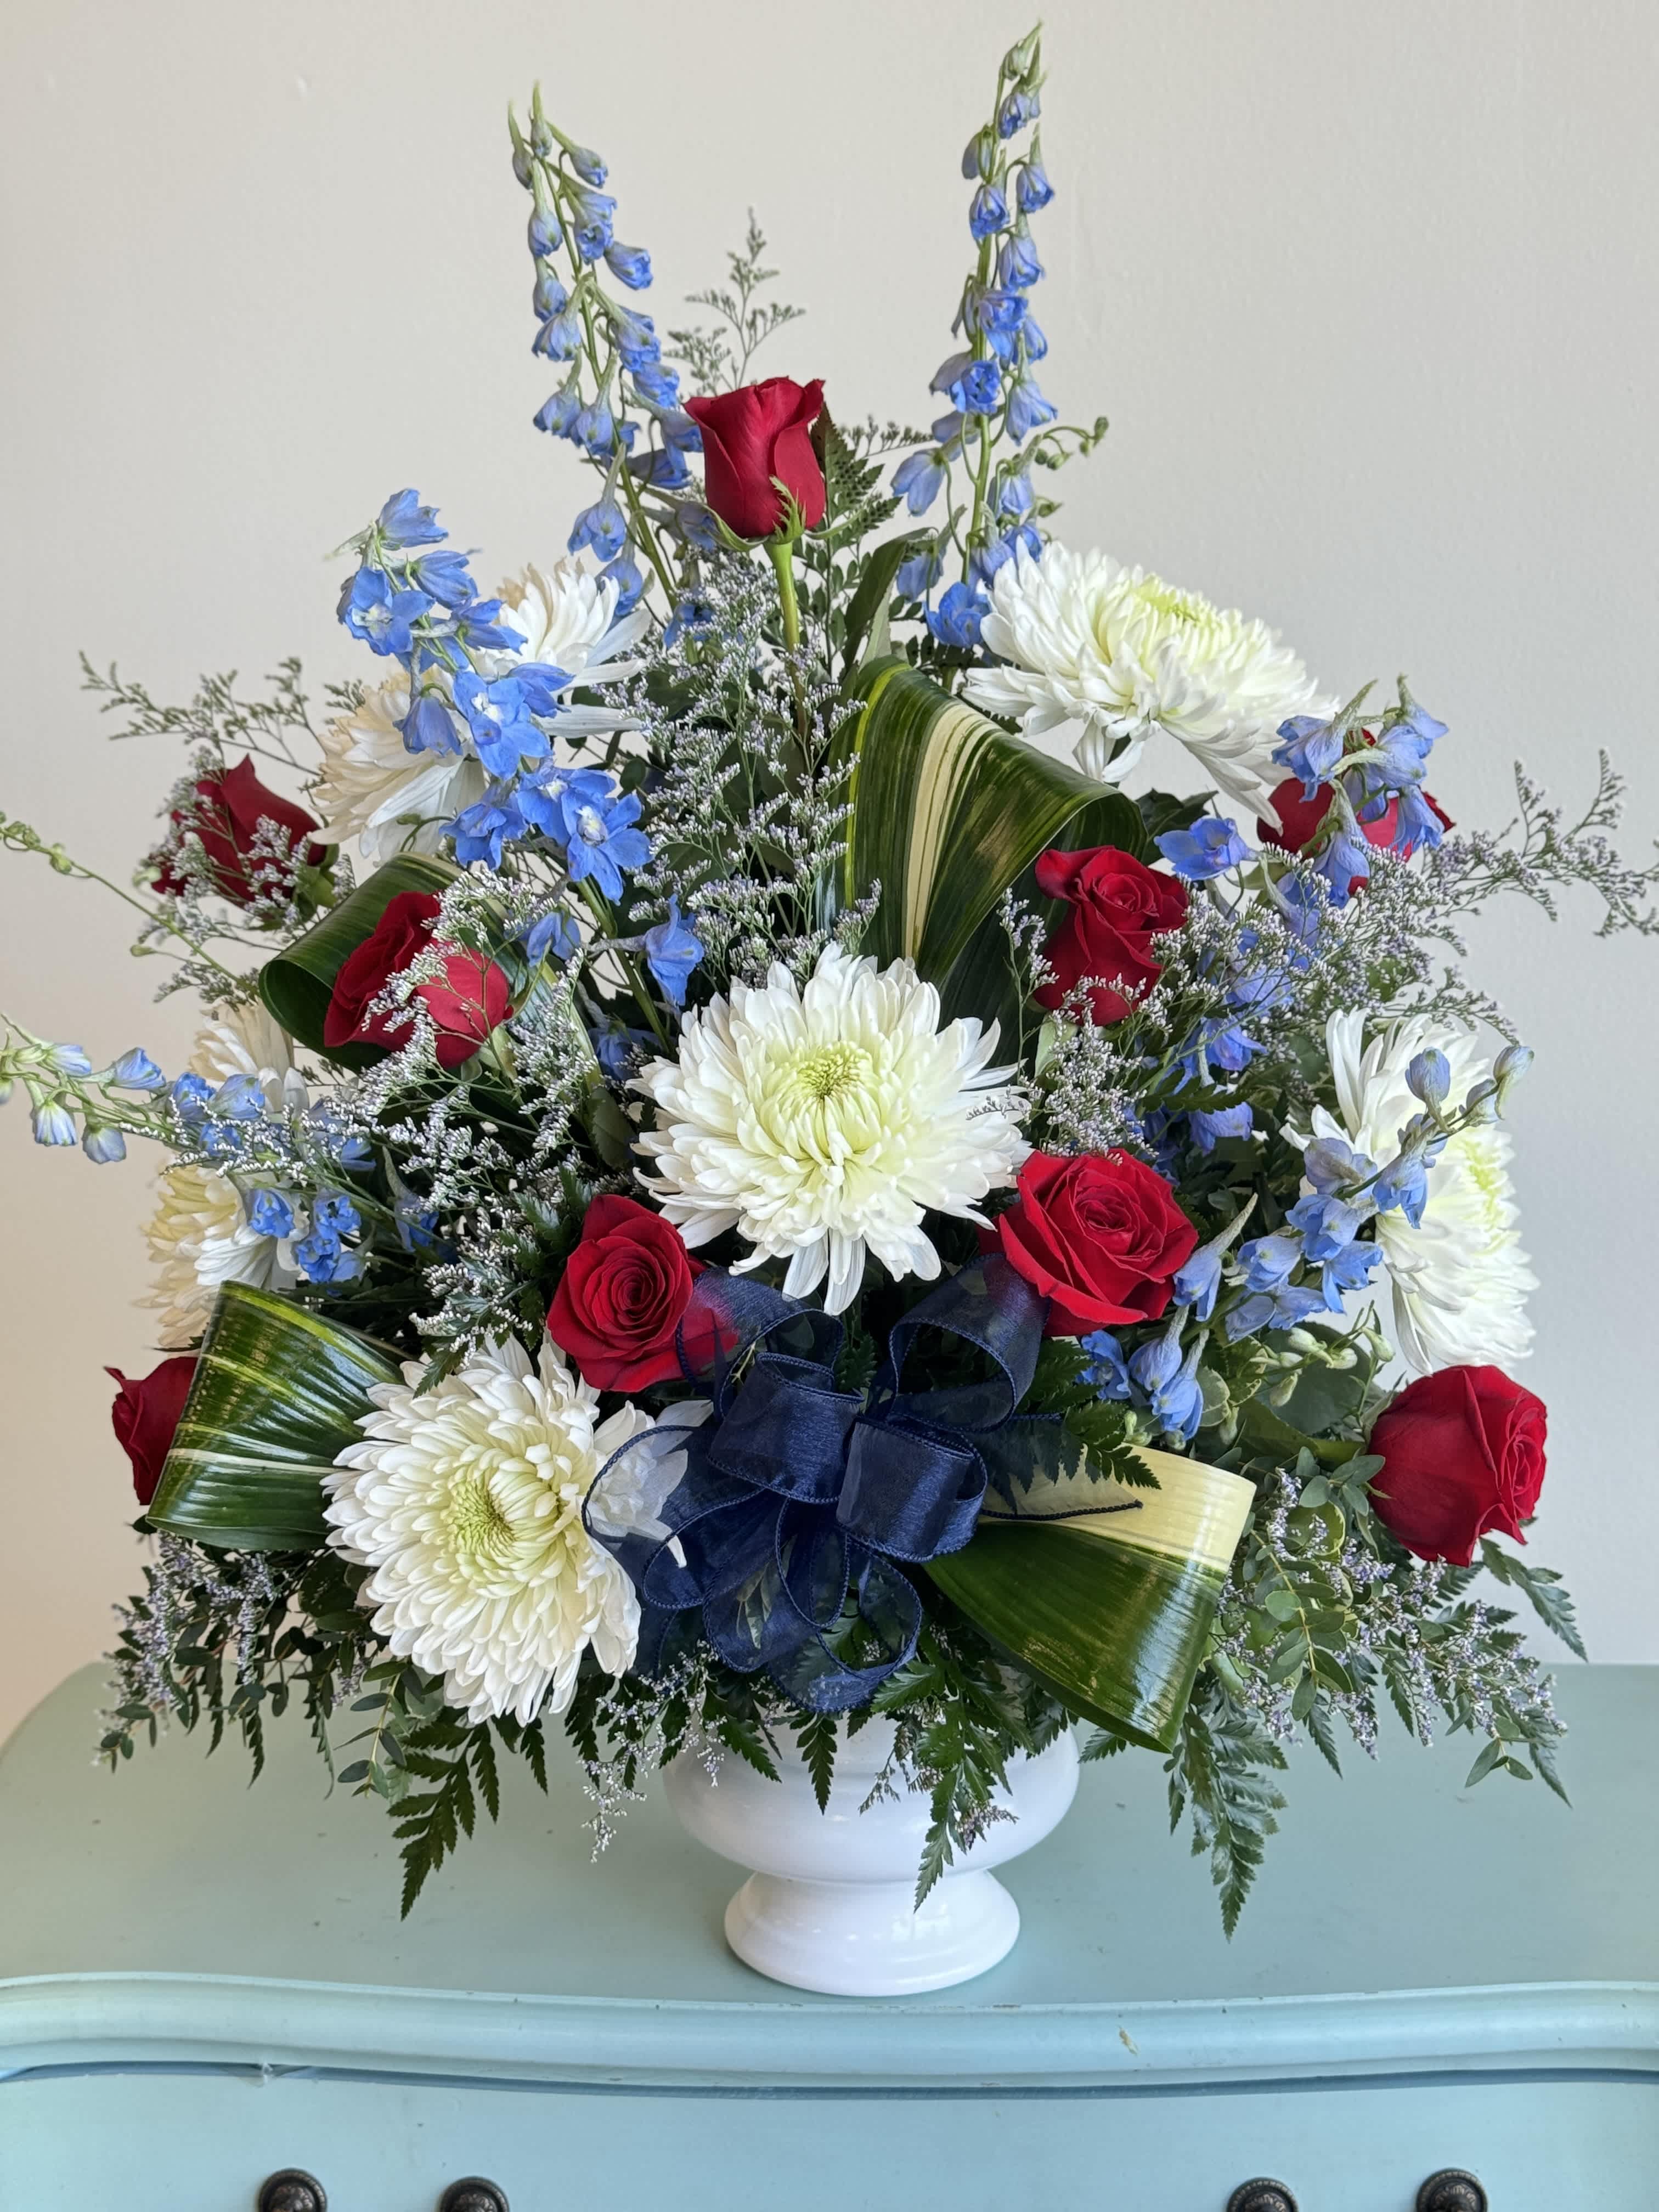 The Patriotic  - Red, white and blue blooms to honor our veterans